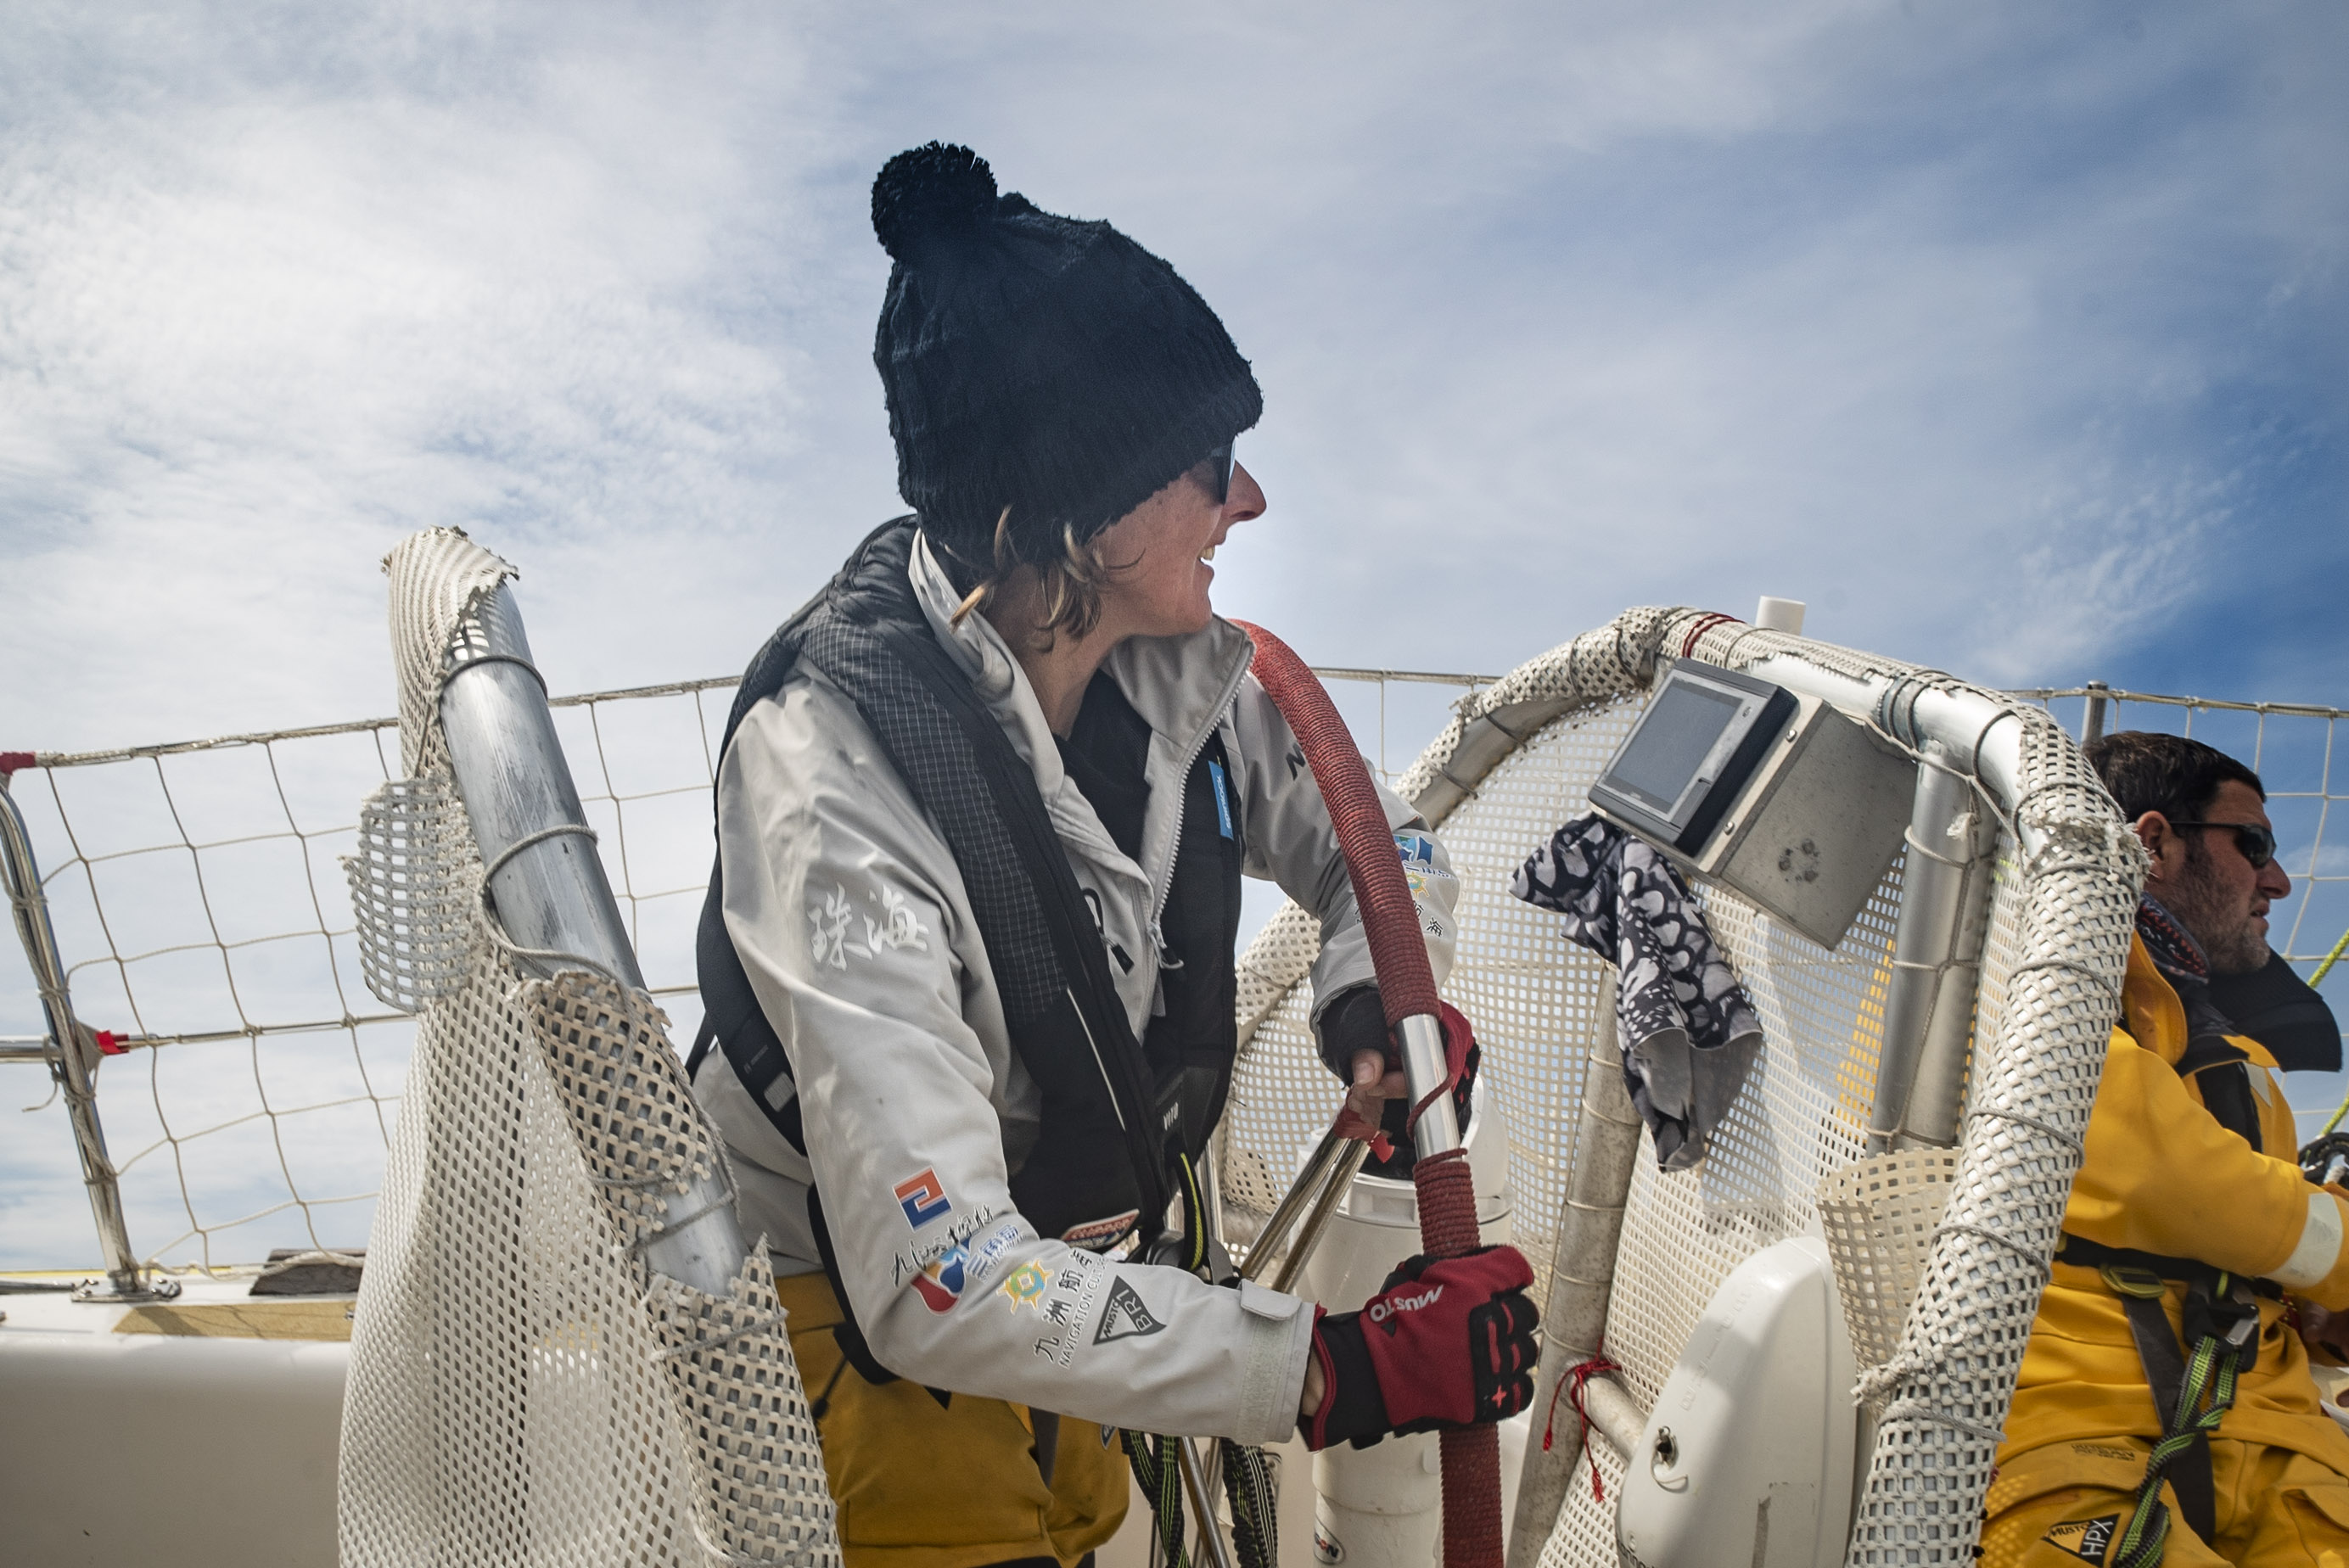 Clipper Race Crew, Melody Schaffer, received her Gold DoE Award from HRH Prince Philip 